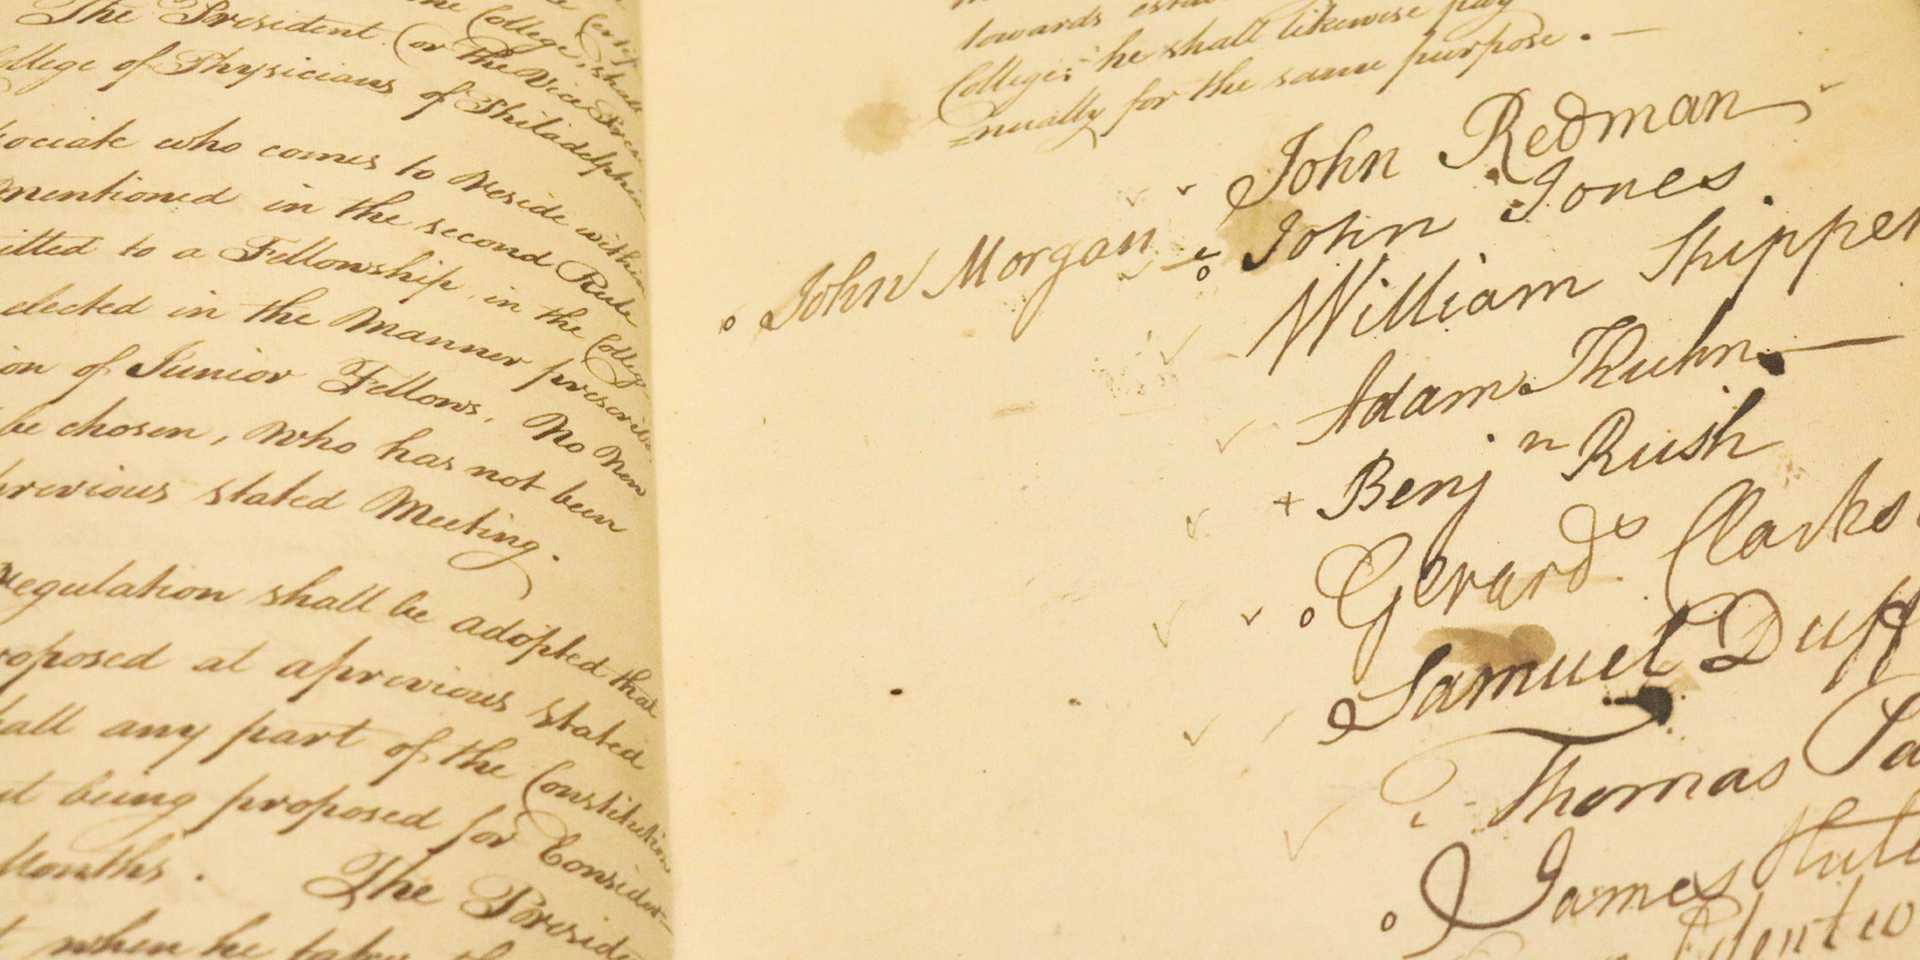 Register book with historical signatures